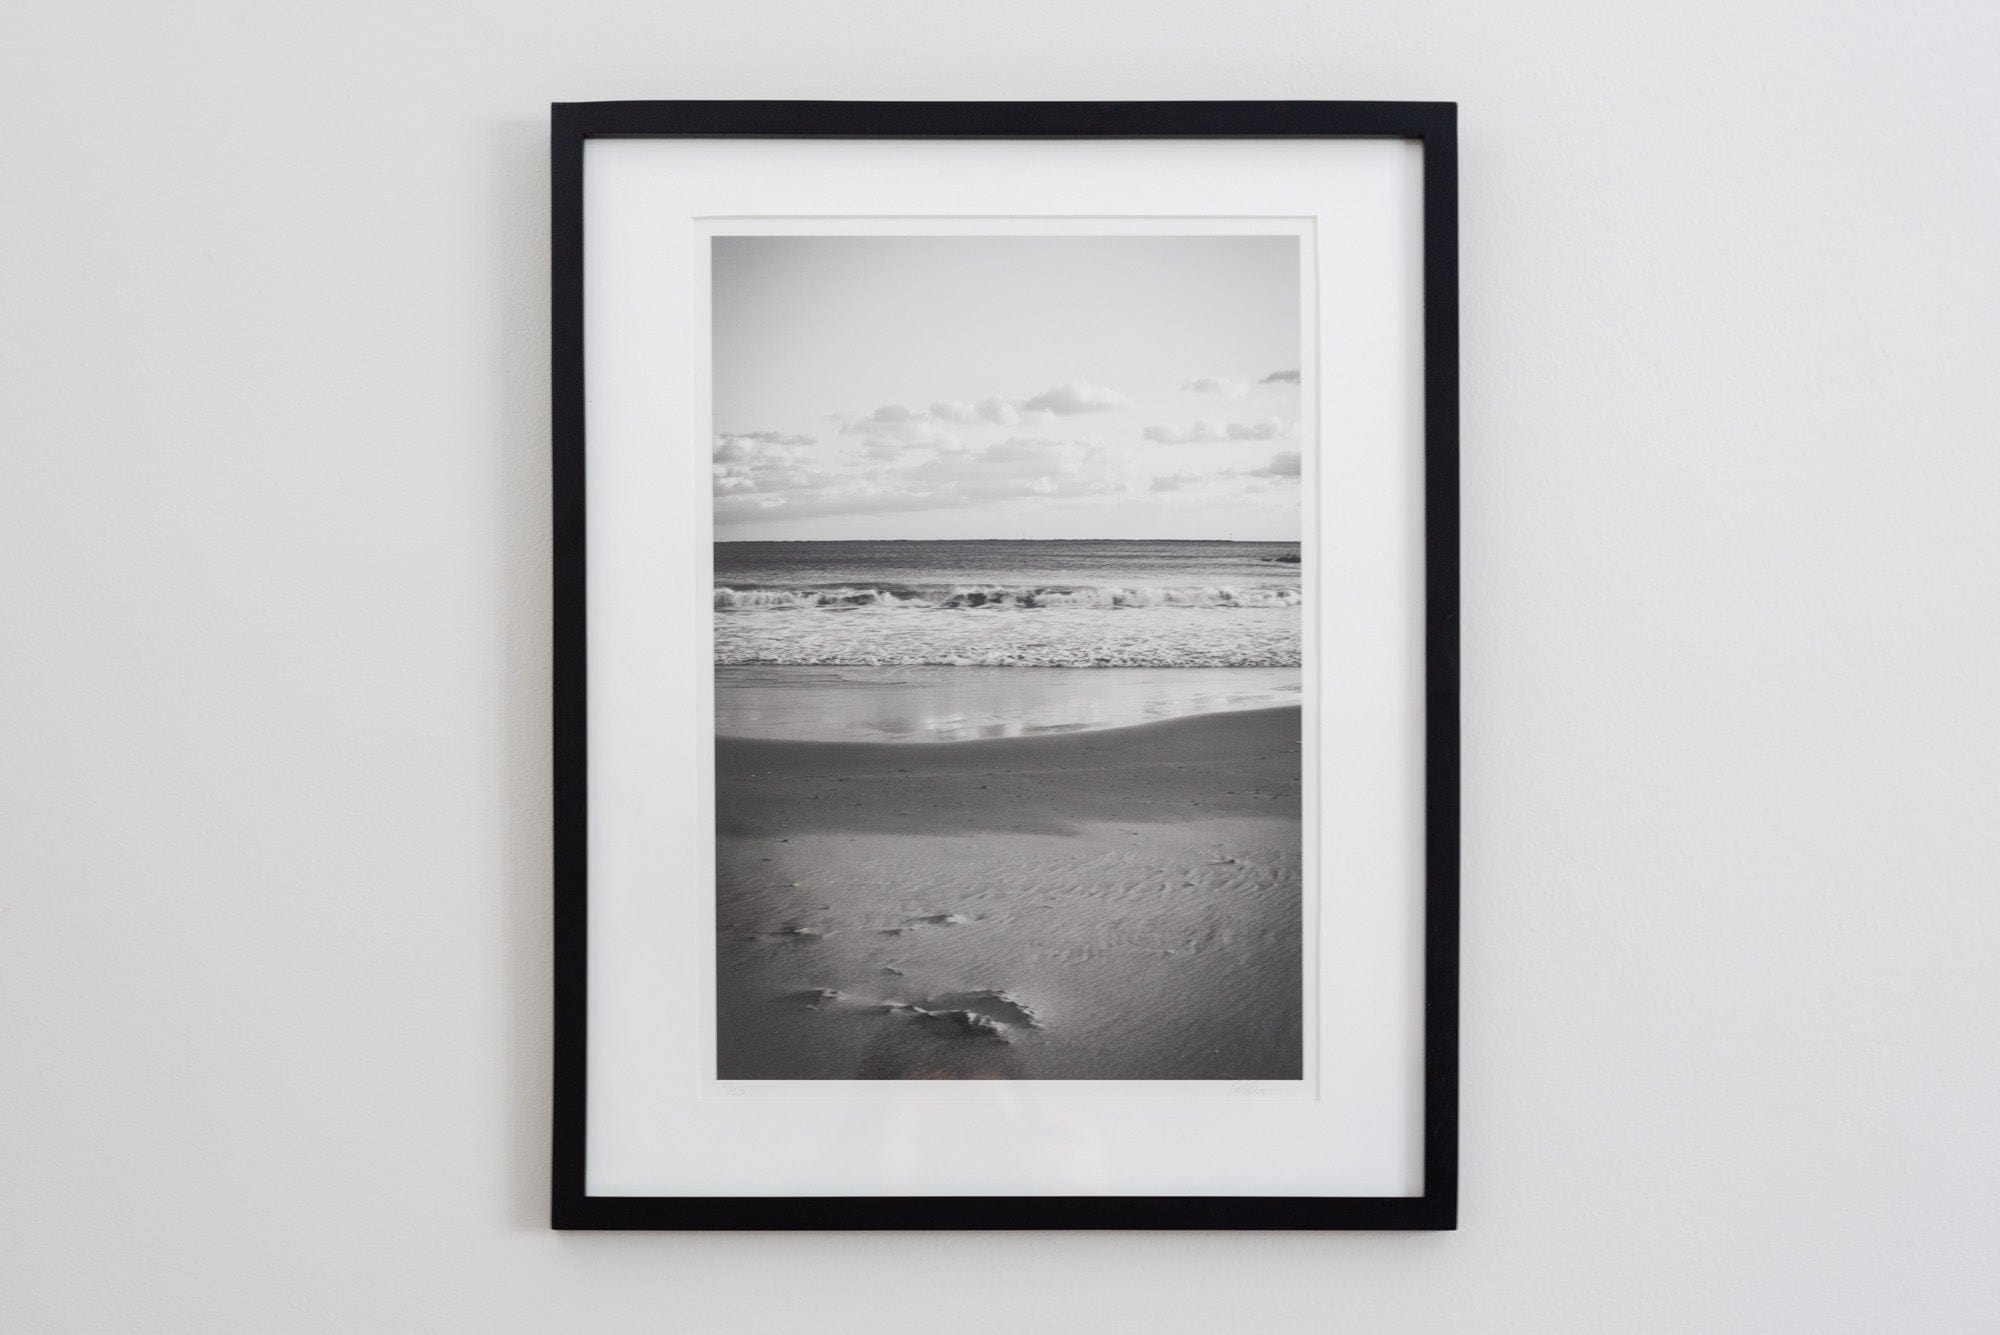 Cate Brown Photo Galilee #1 // Framed Fine Art 16x20" // Limited Edition 1 of 20 Available Inventory Ocean Fine Art